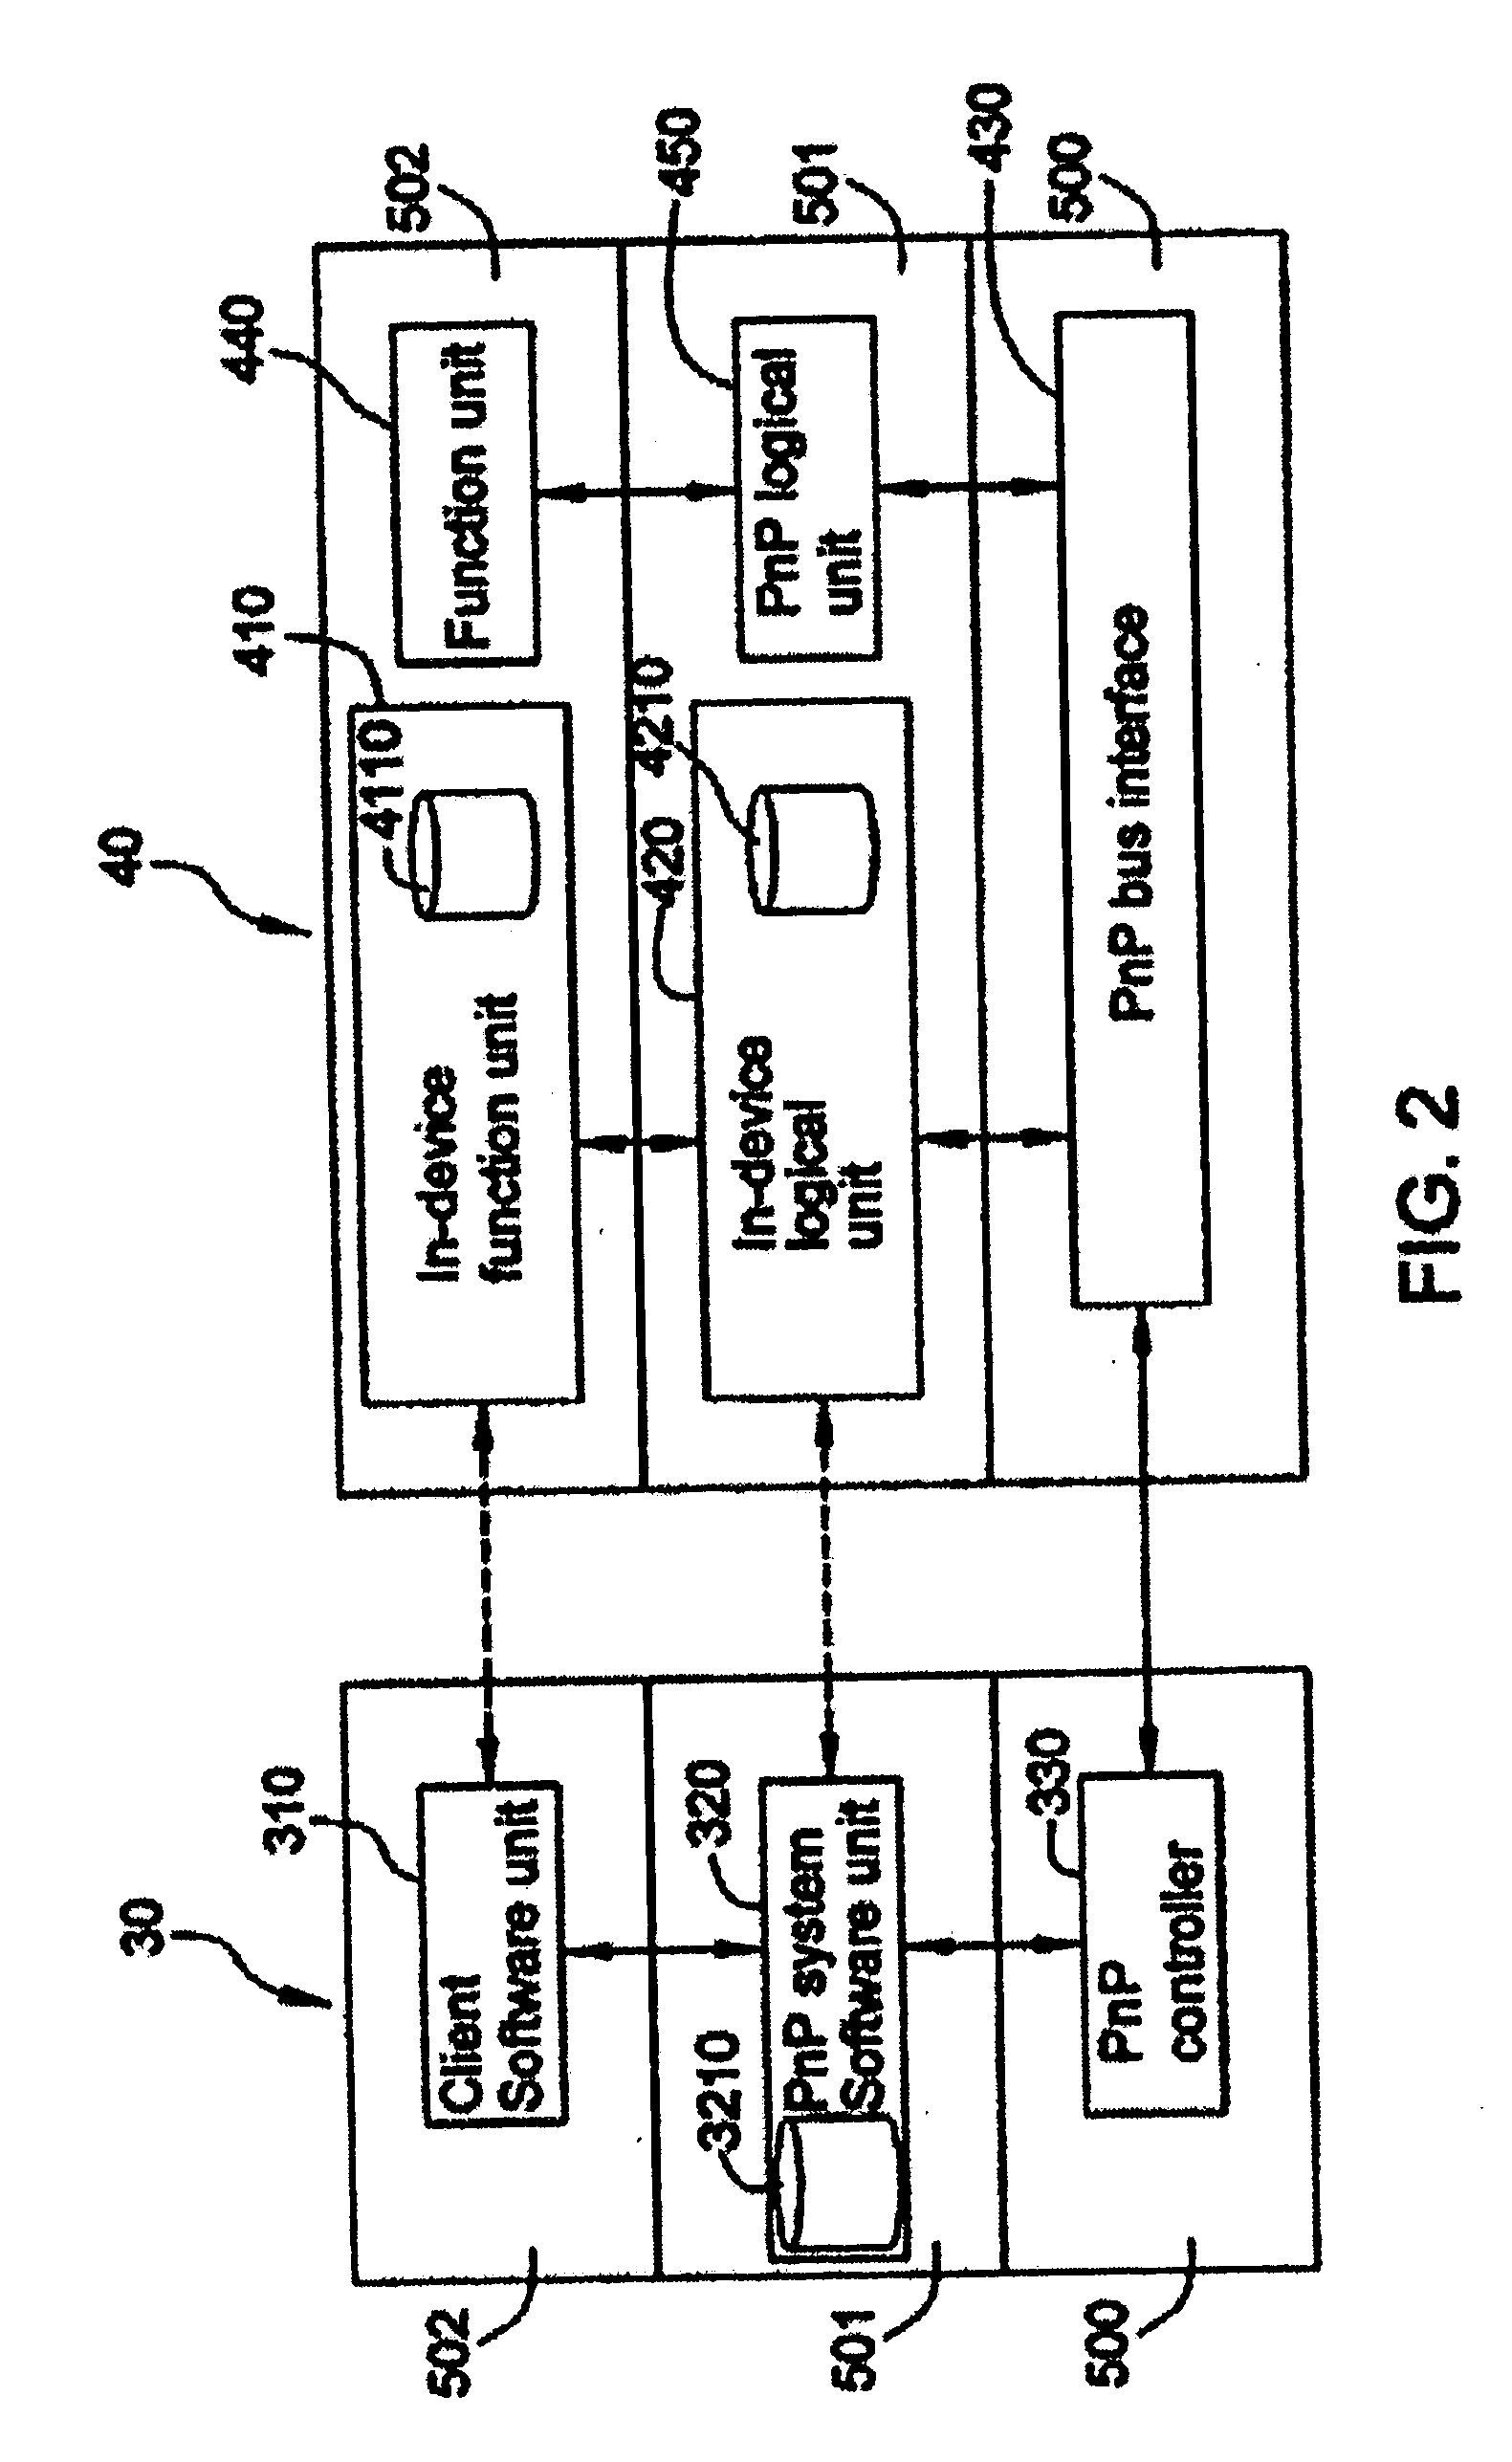 Plug-and-play interconnection architecture and method with in-device storage module in peripheral device